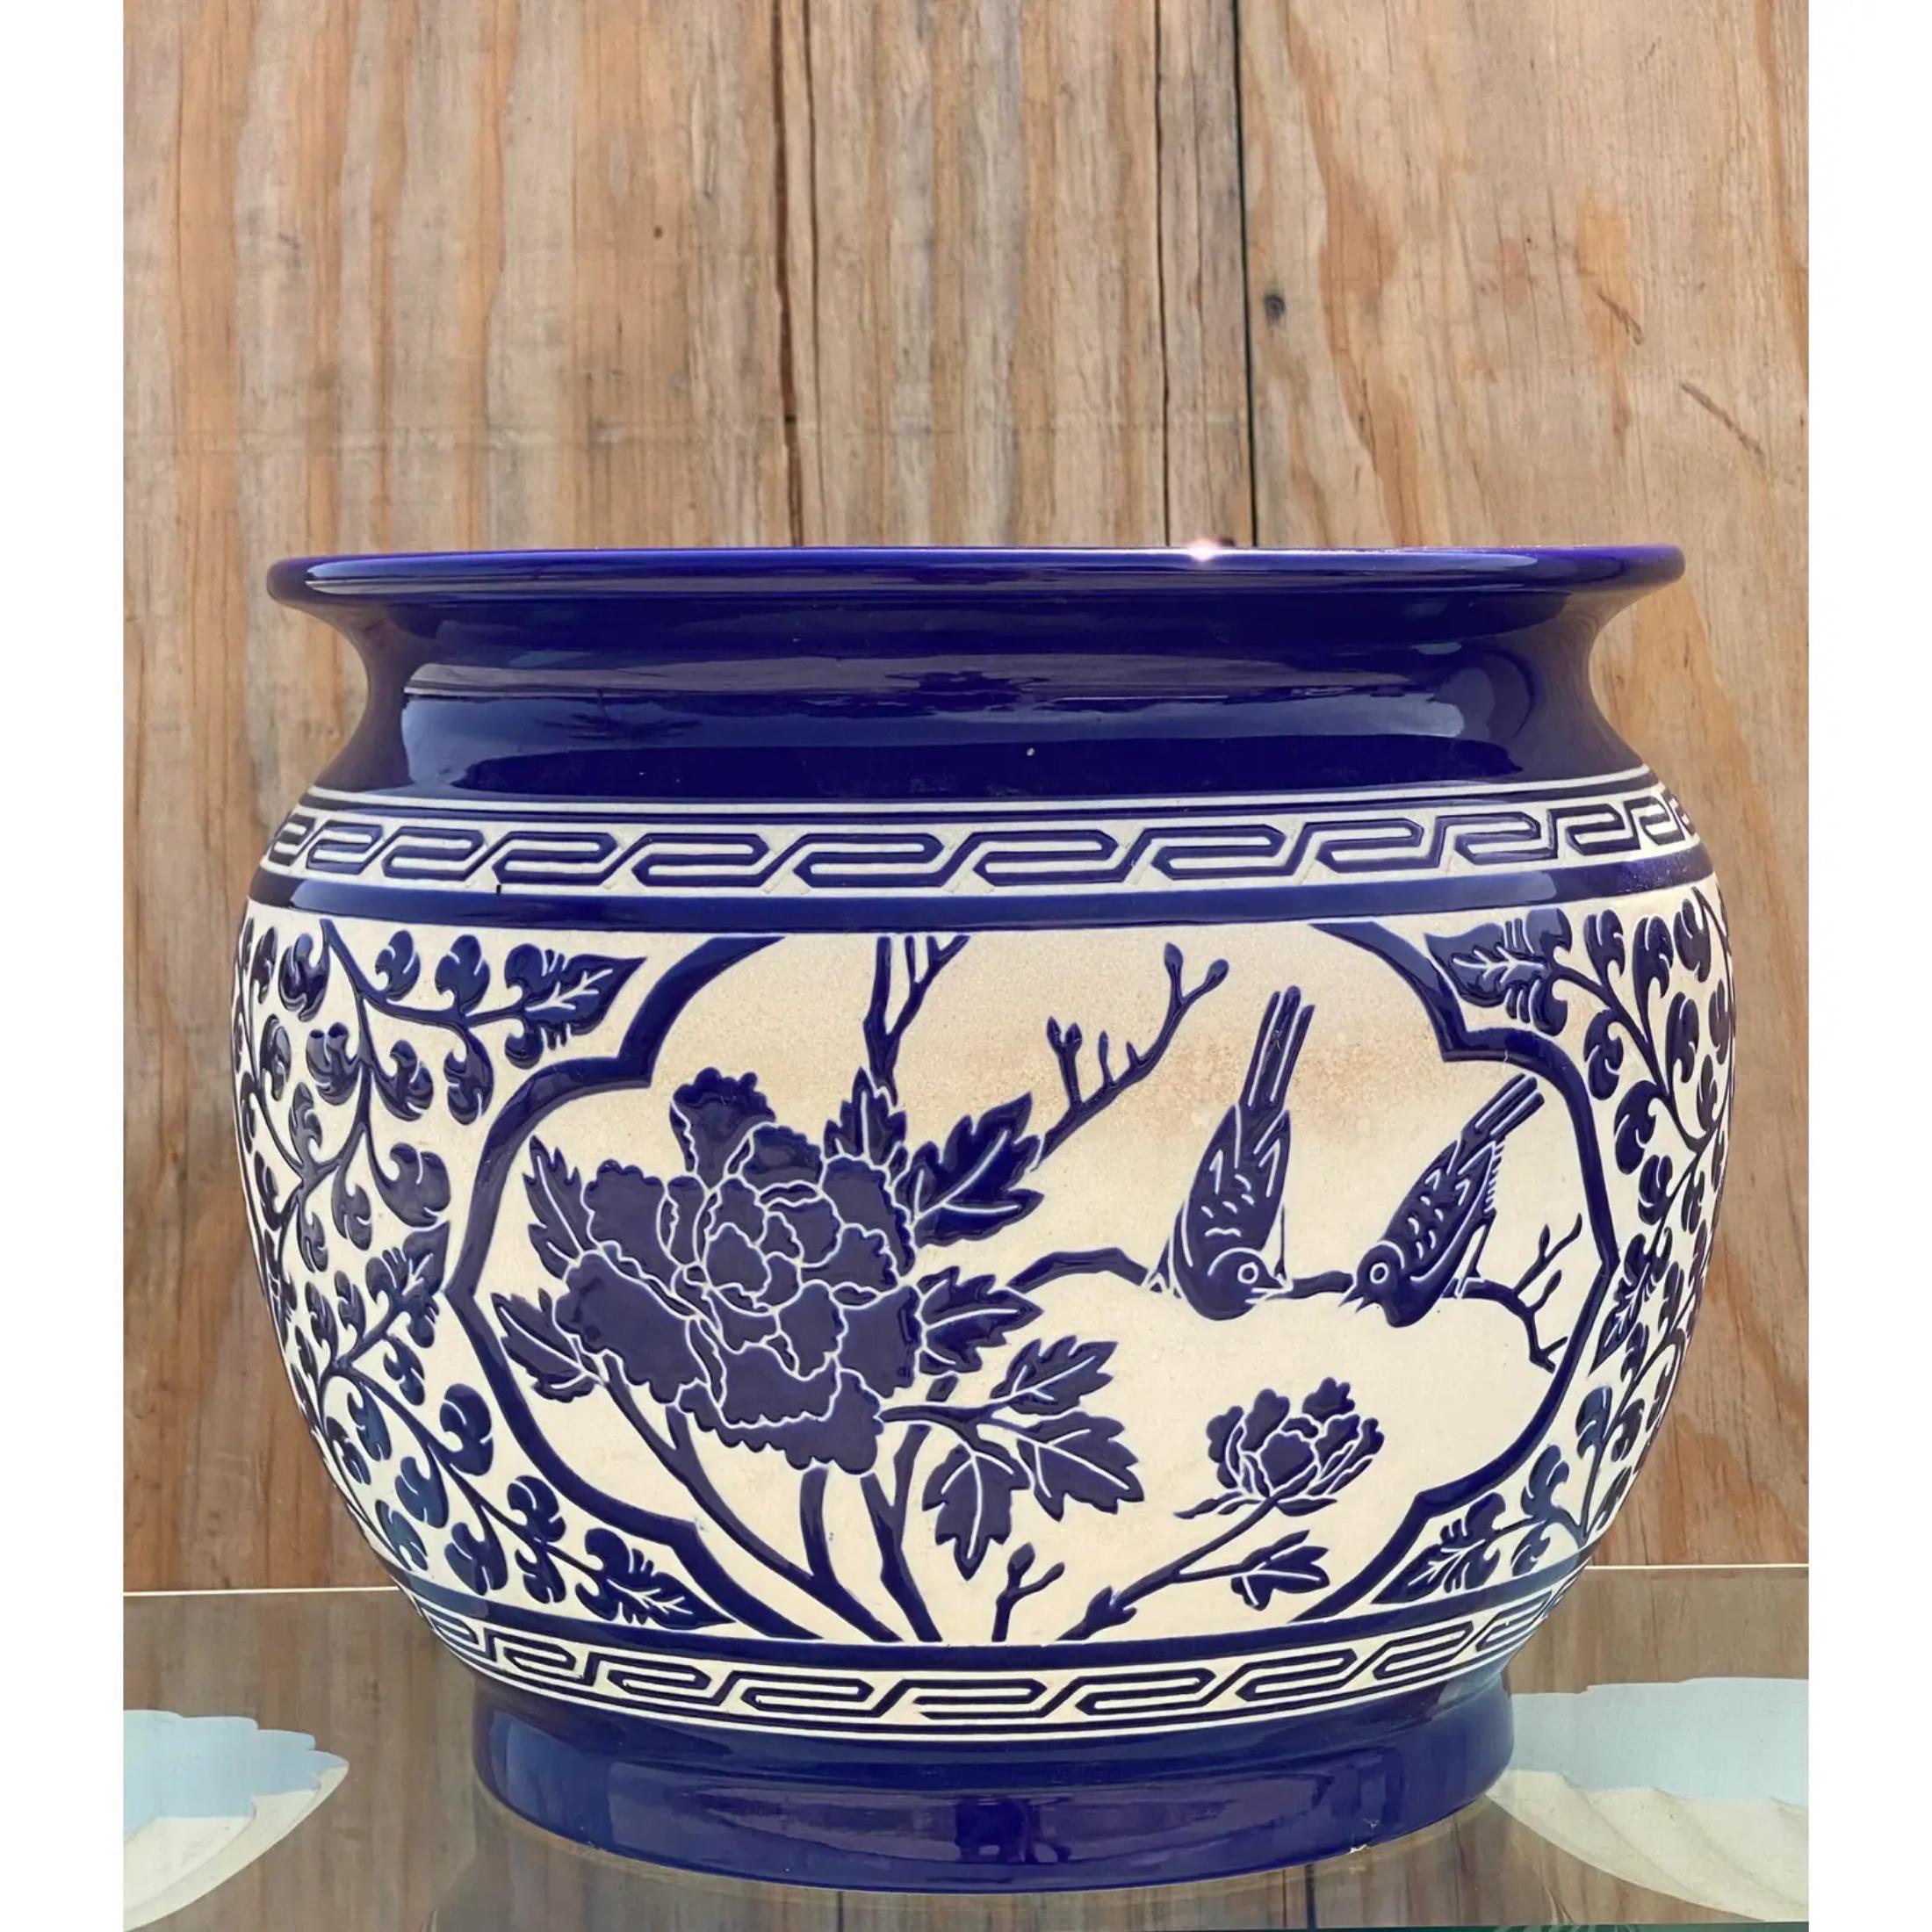 Fantastic vintage blue and white planter. Beautiful Greek Key trim above a floral garden scene. Acquired from a Palm Beach estate